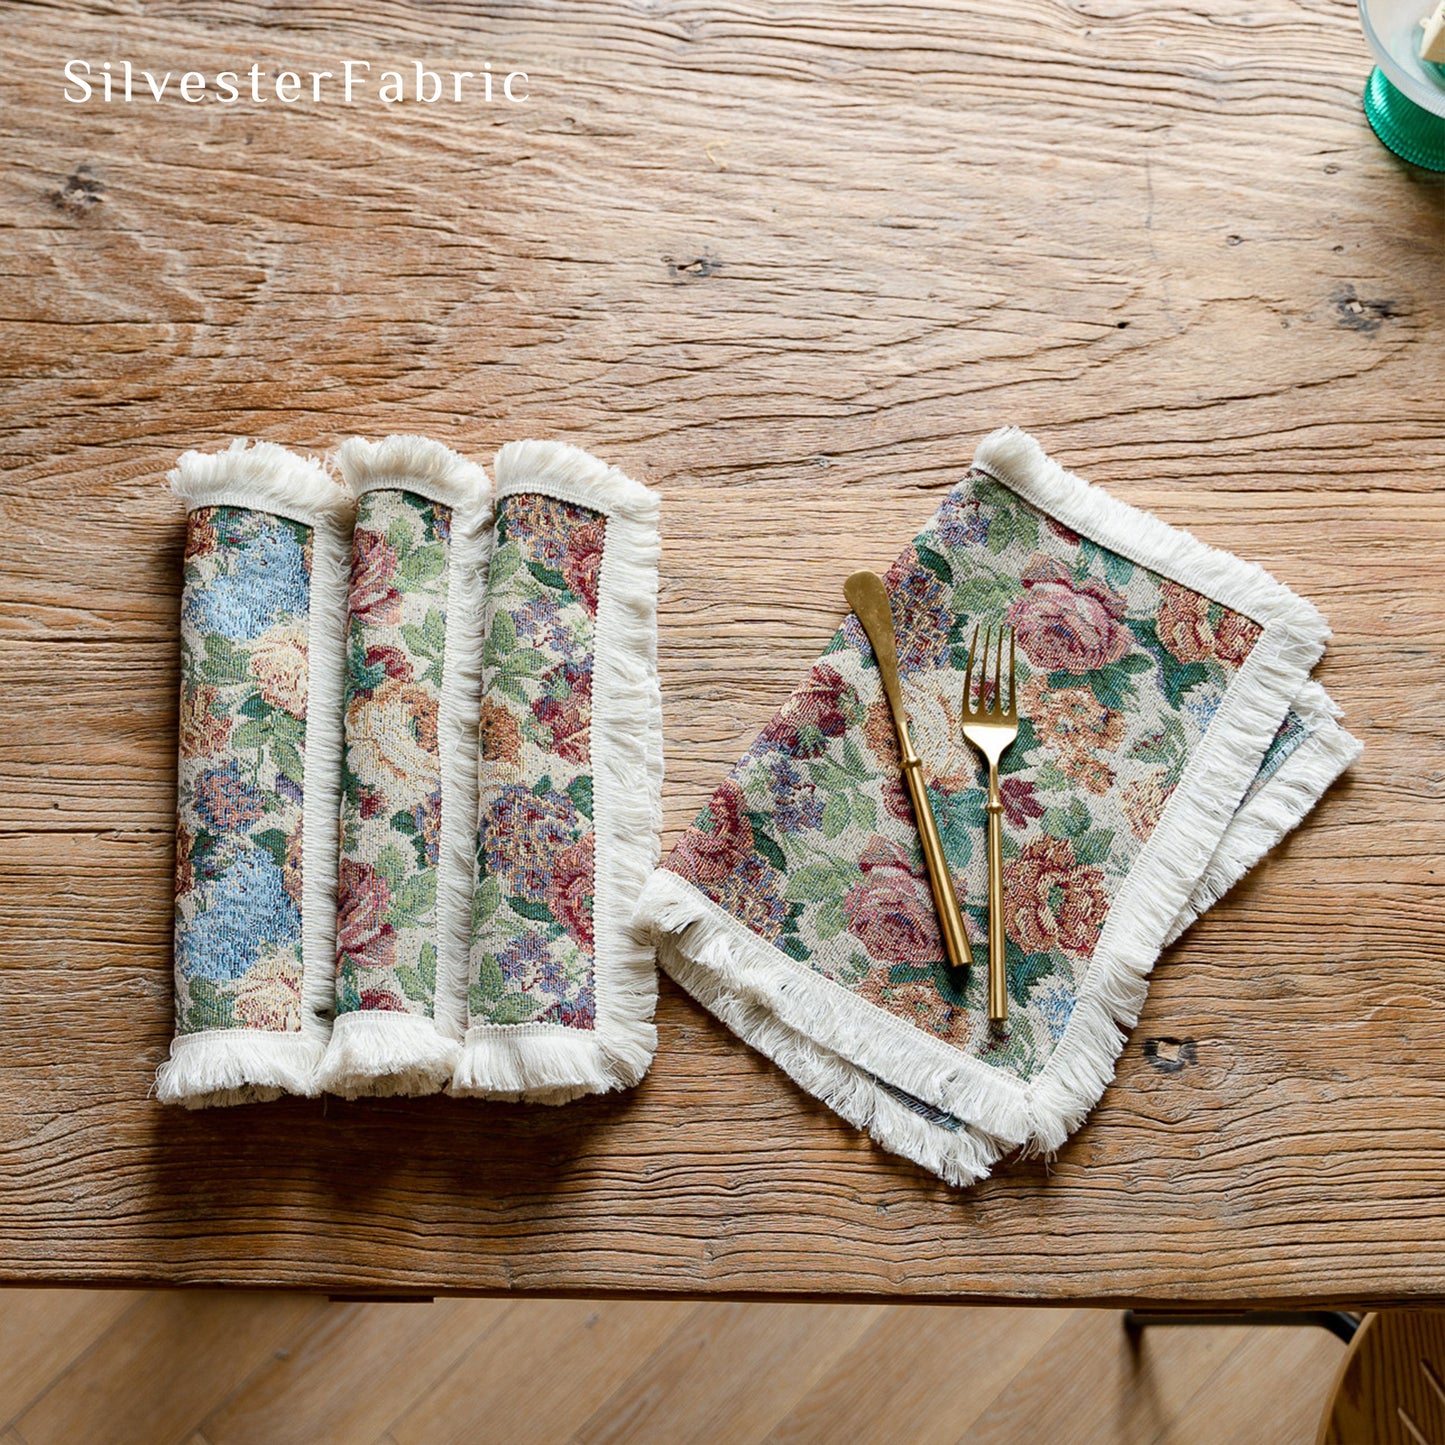 French Oil-Like Vibrant Floral Patterns Vintage Cotton Long Table Runners